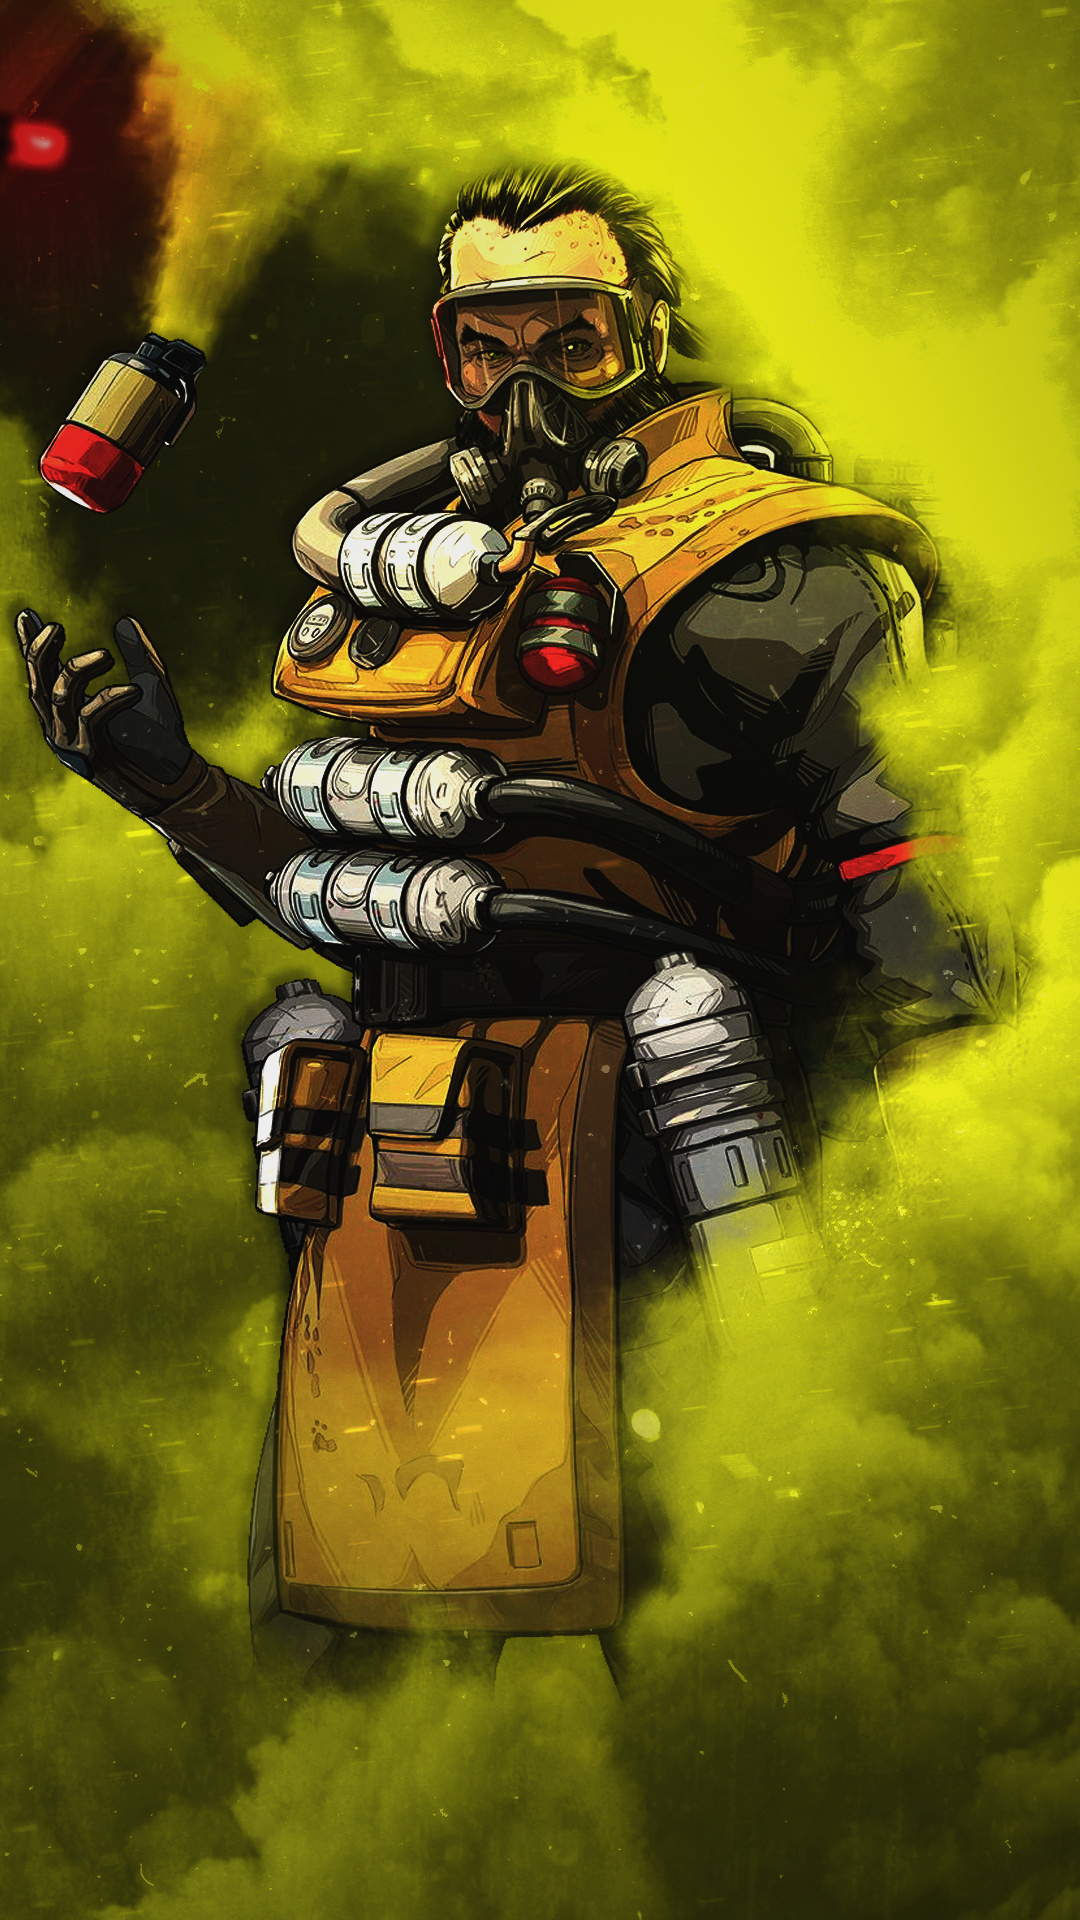 Apex Legends: Caustic, Nox Vision highlights enemies that are in the gas. 1080x1920 Full HD Wallpaper.